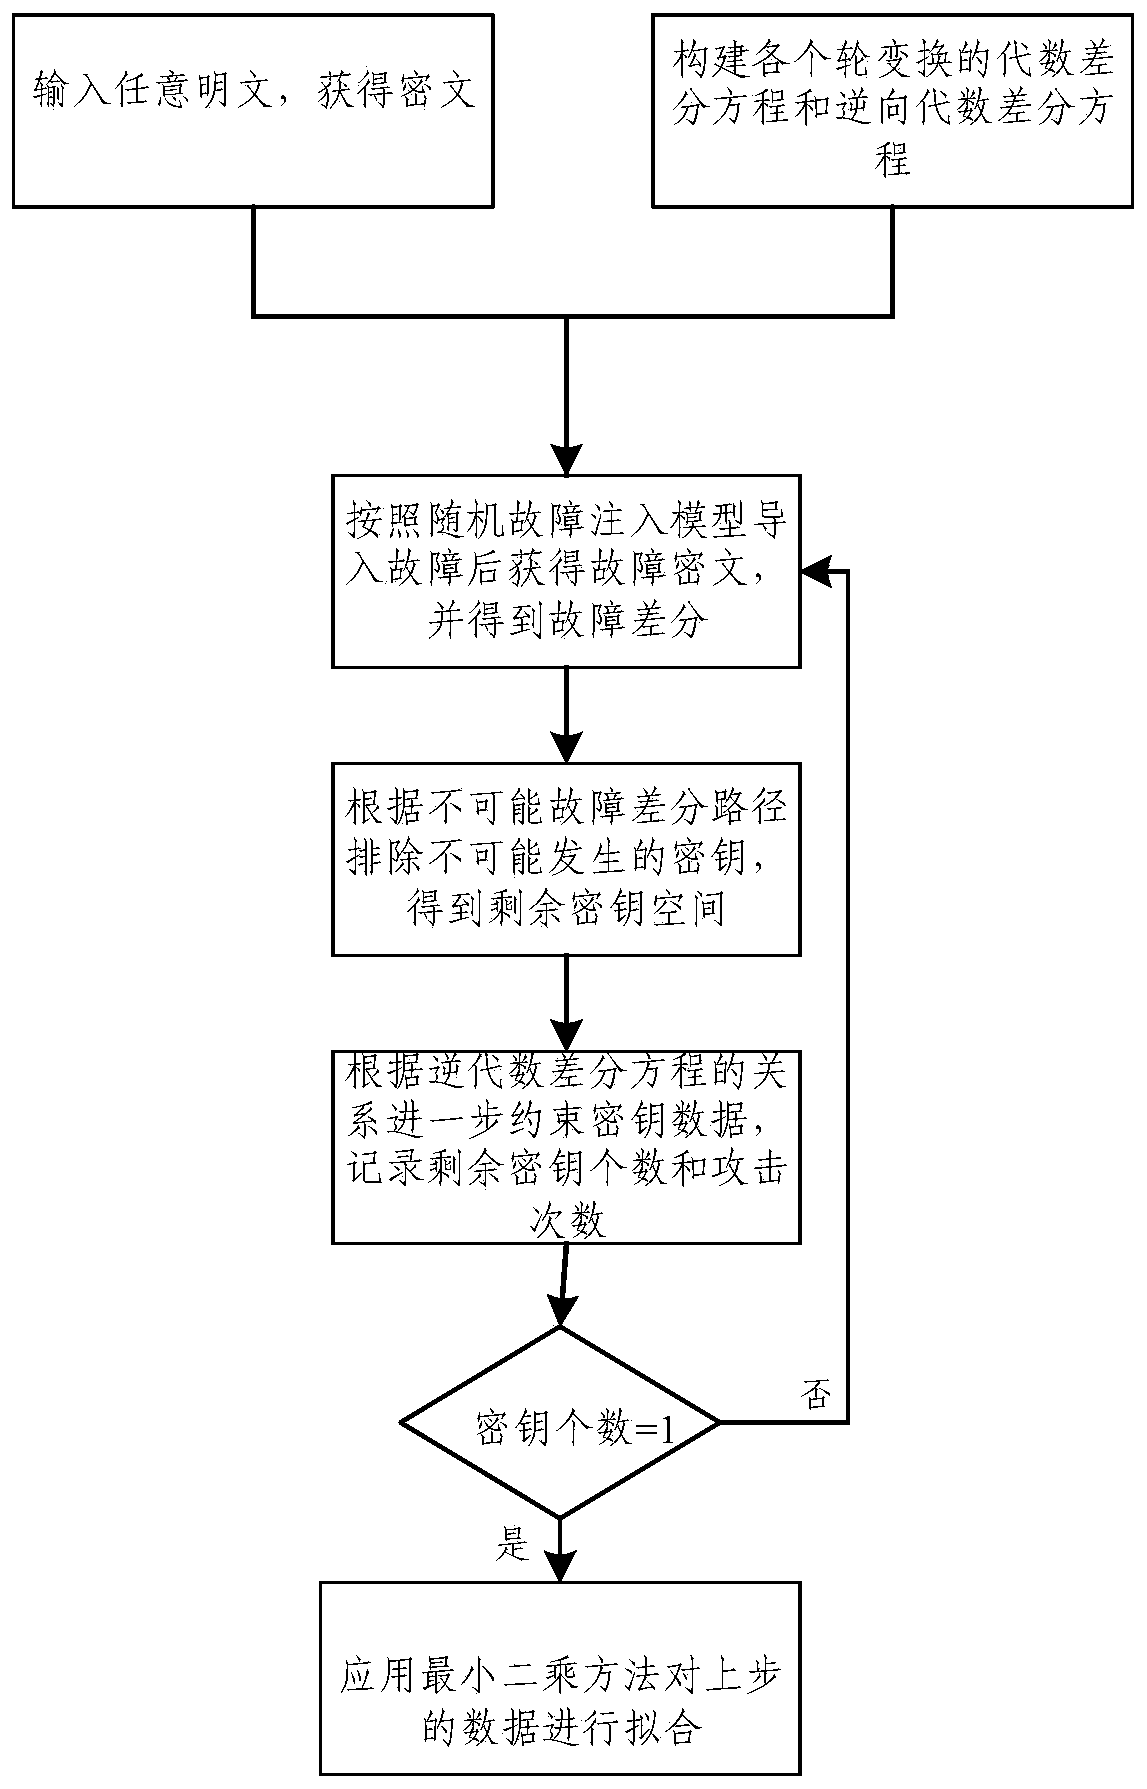 An SPN type block password fault attack resistance capability assessment method and device